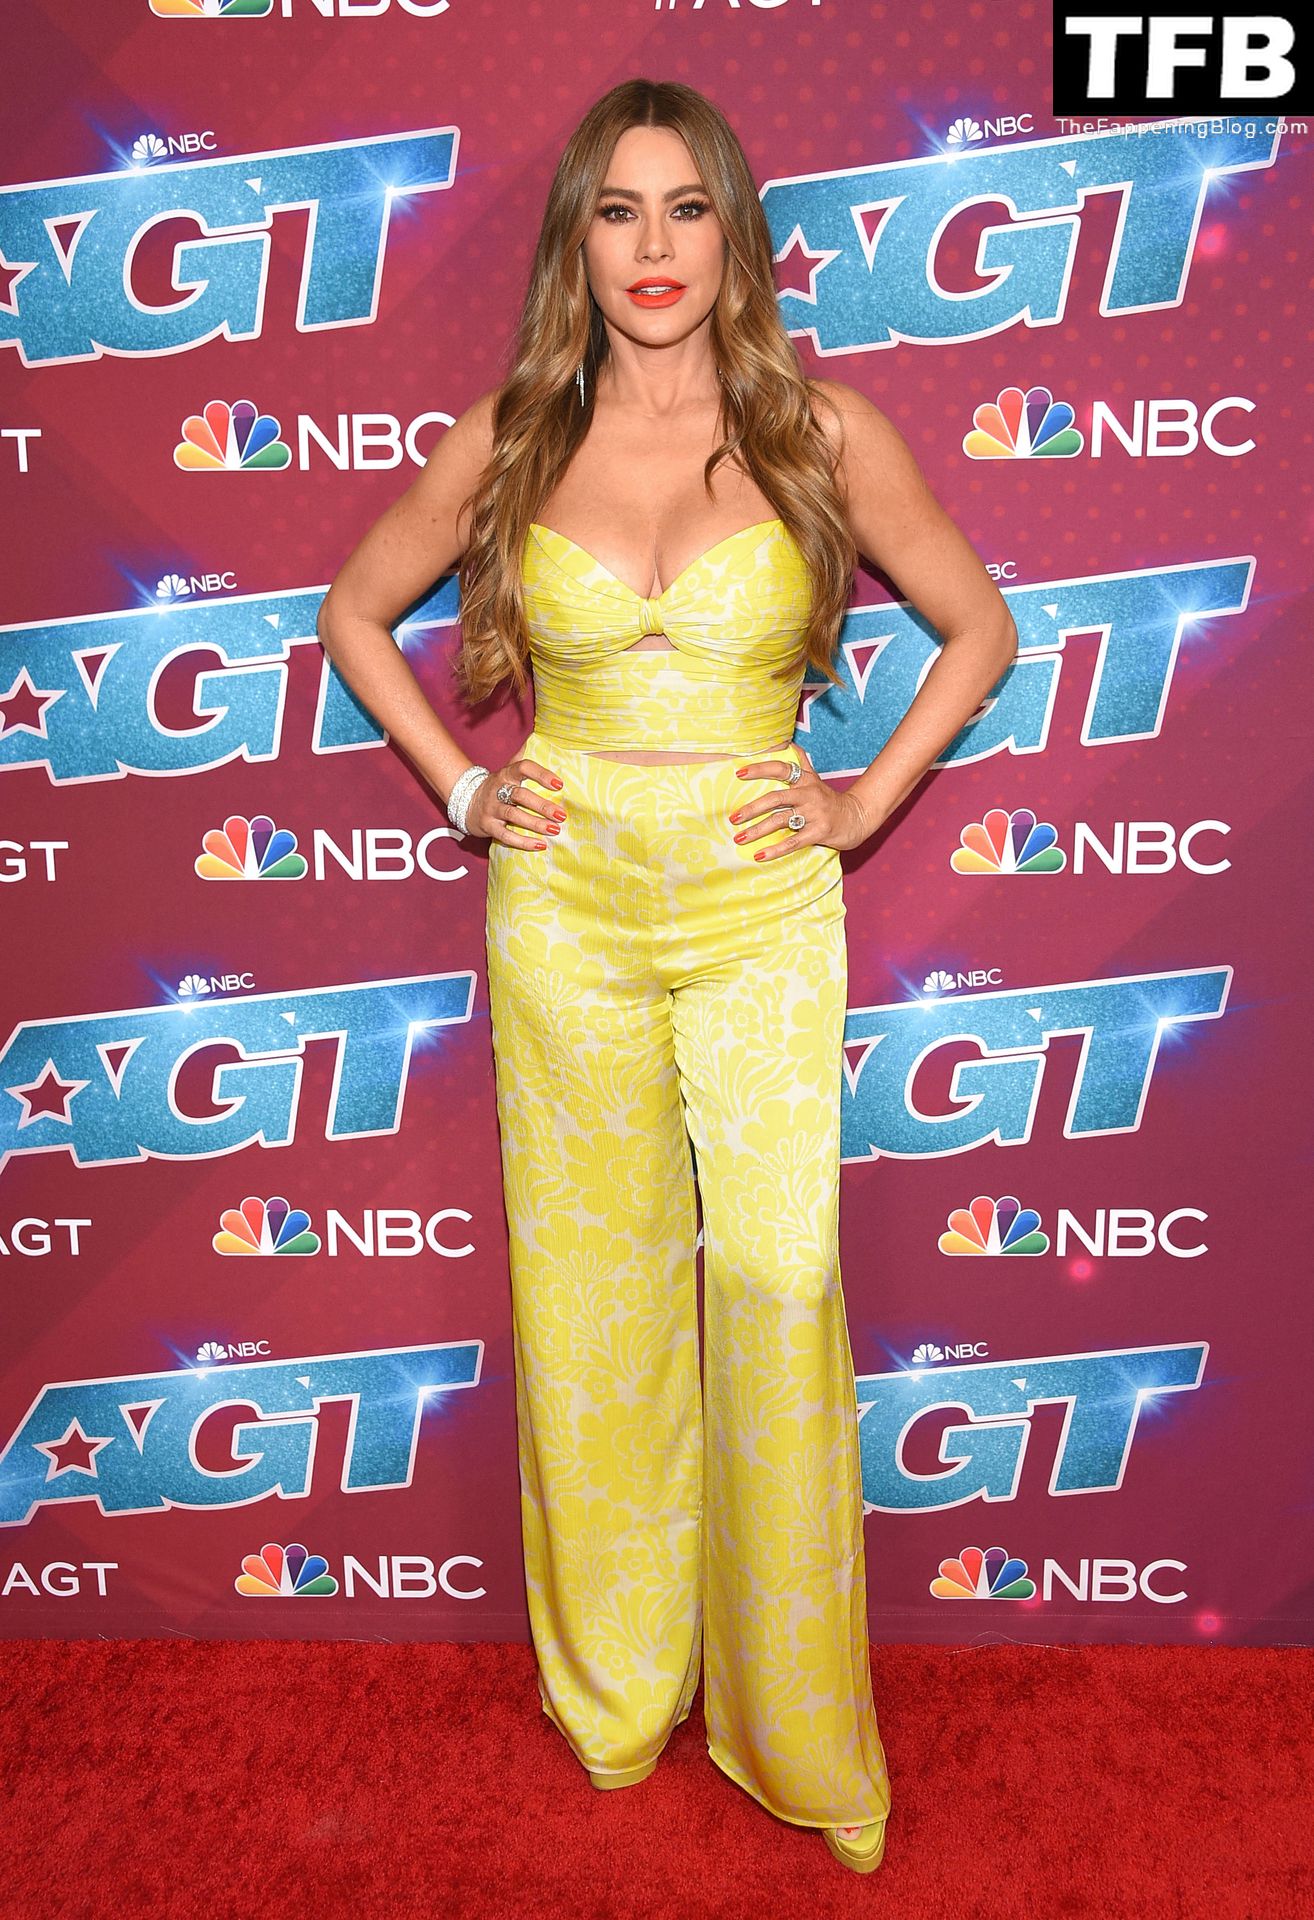 Sofi­a Vergara Flaunts Her Cleavage at the Red Carpet of the “America’s Got Talent” Season 17 Live Show (60 Photos)